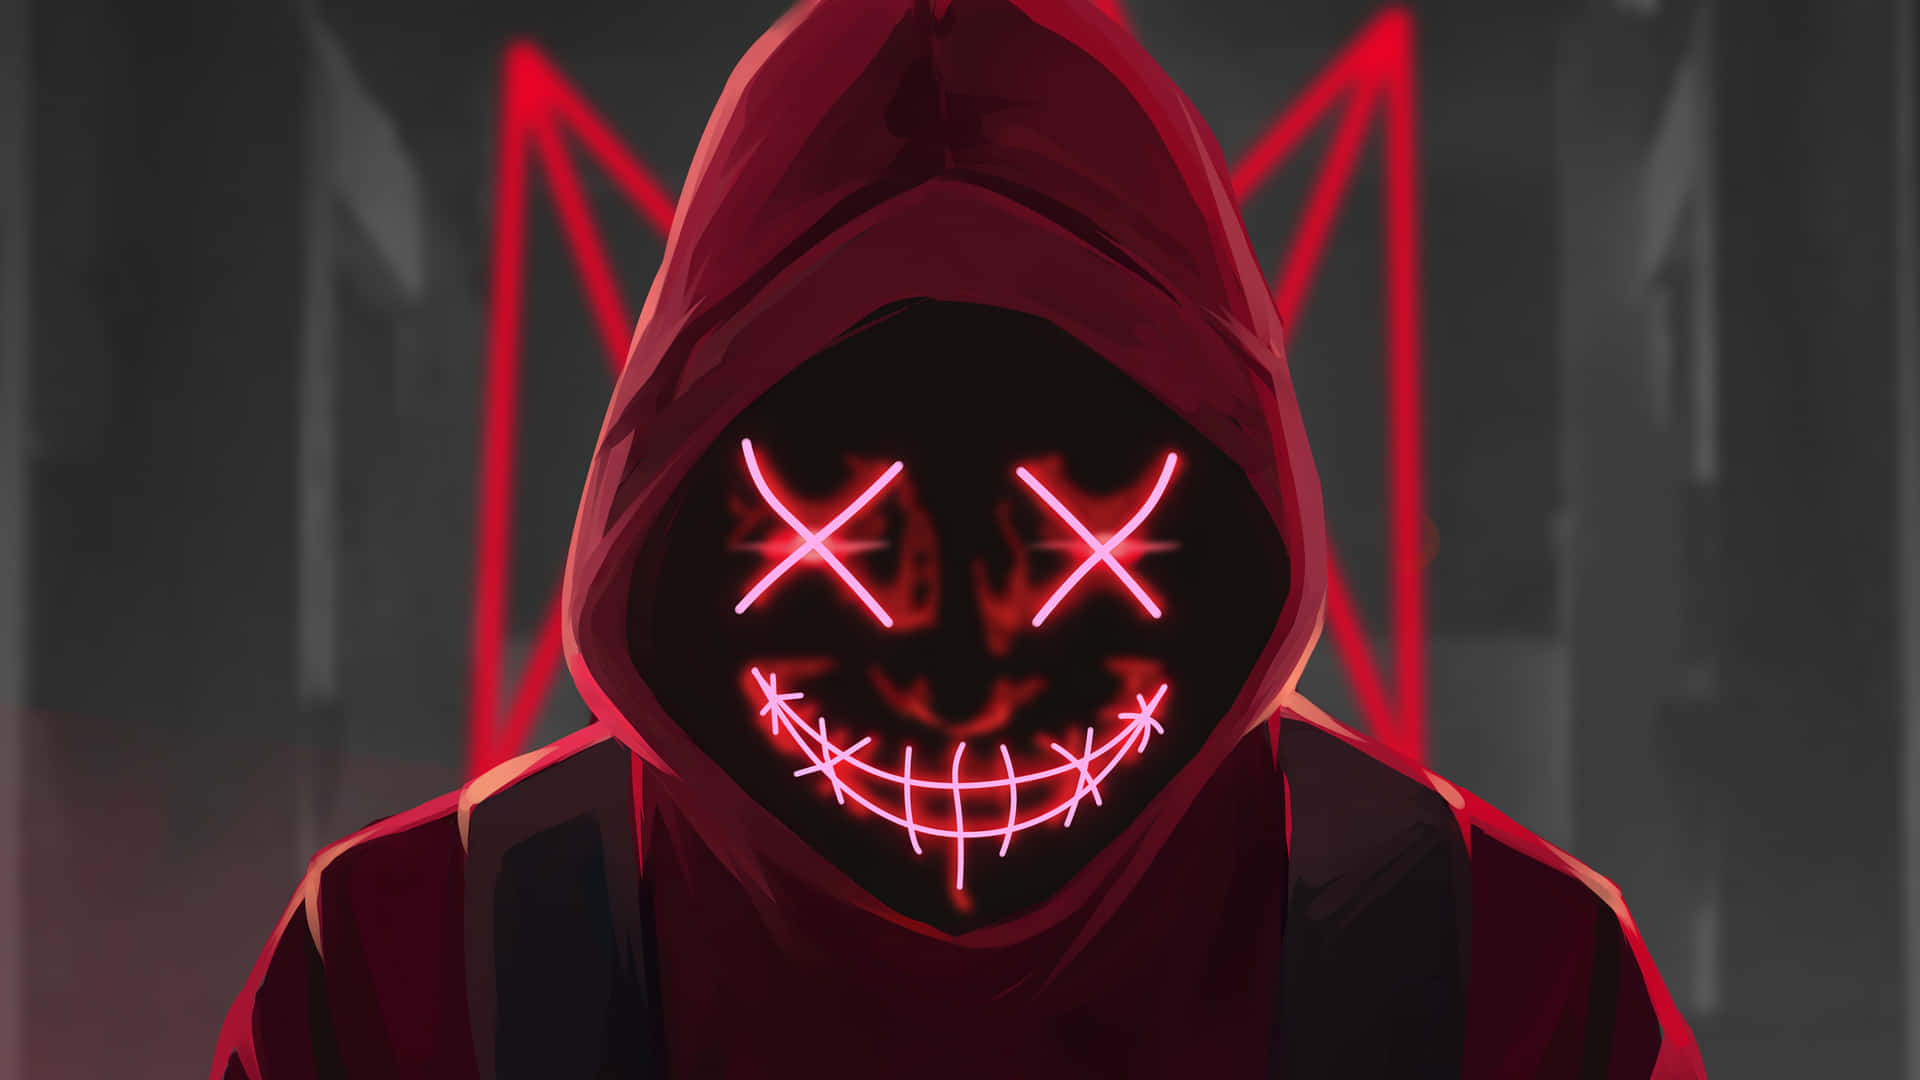 Red Hooded Figurewith Neon Mask Wallpaper